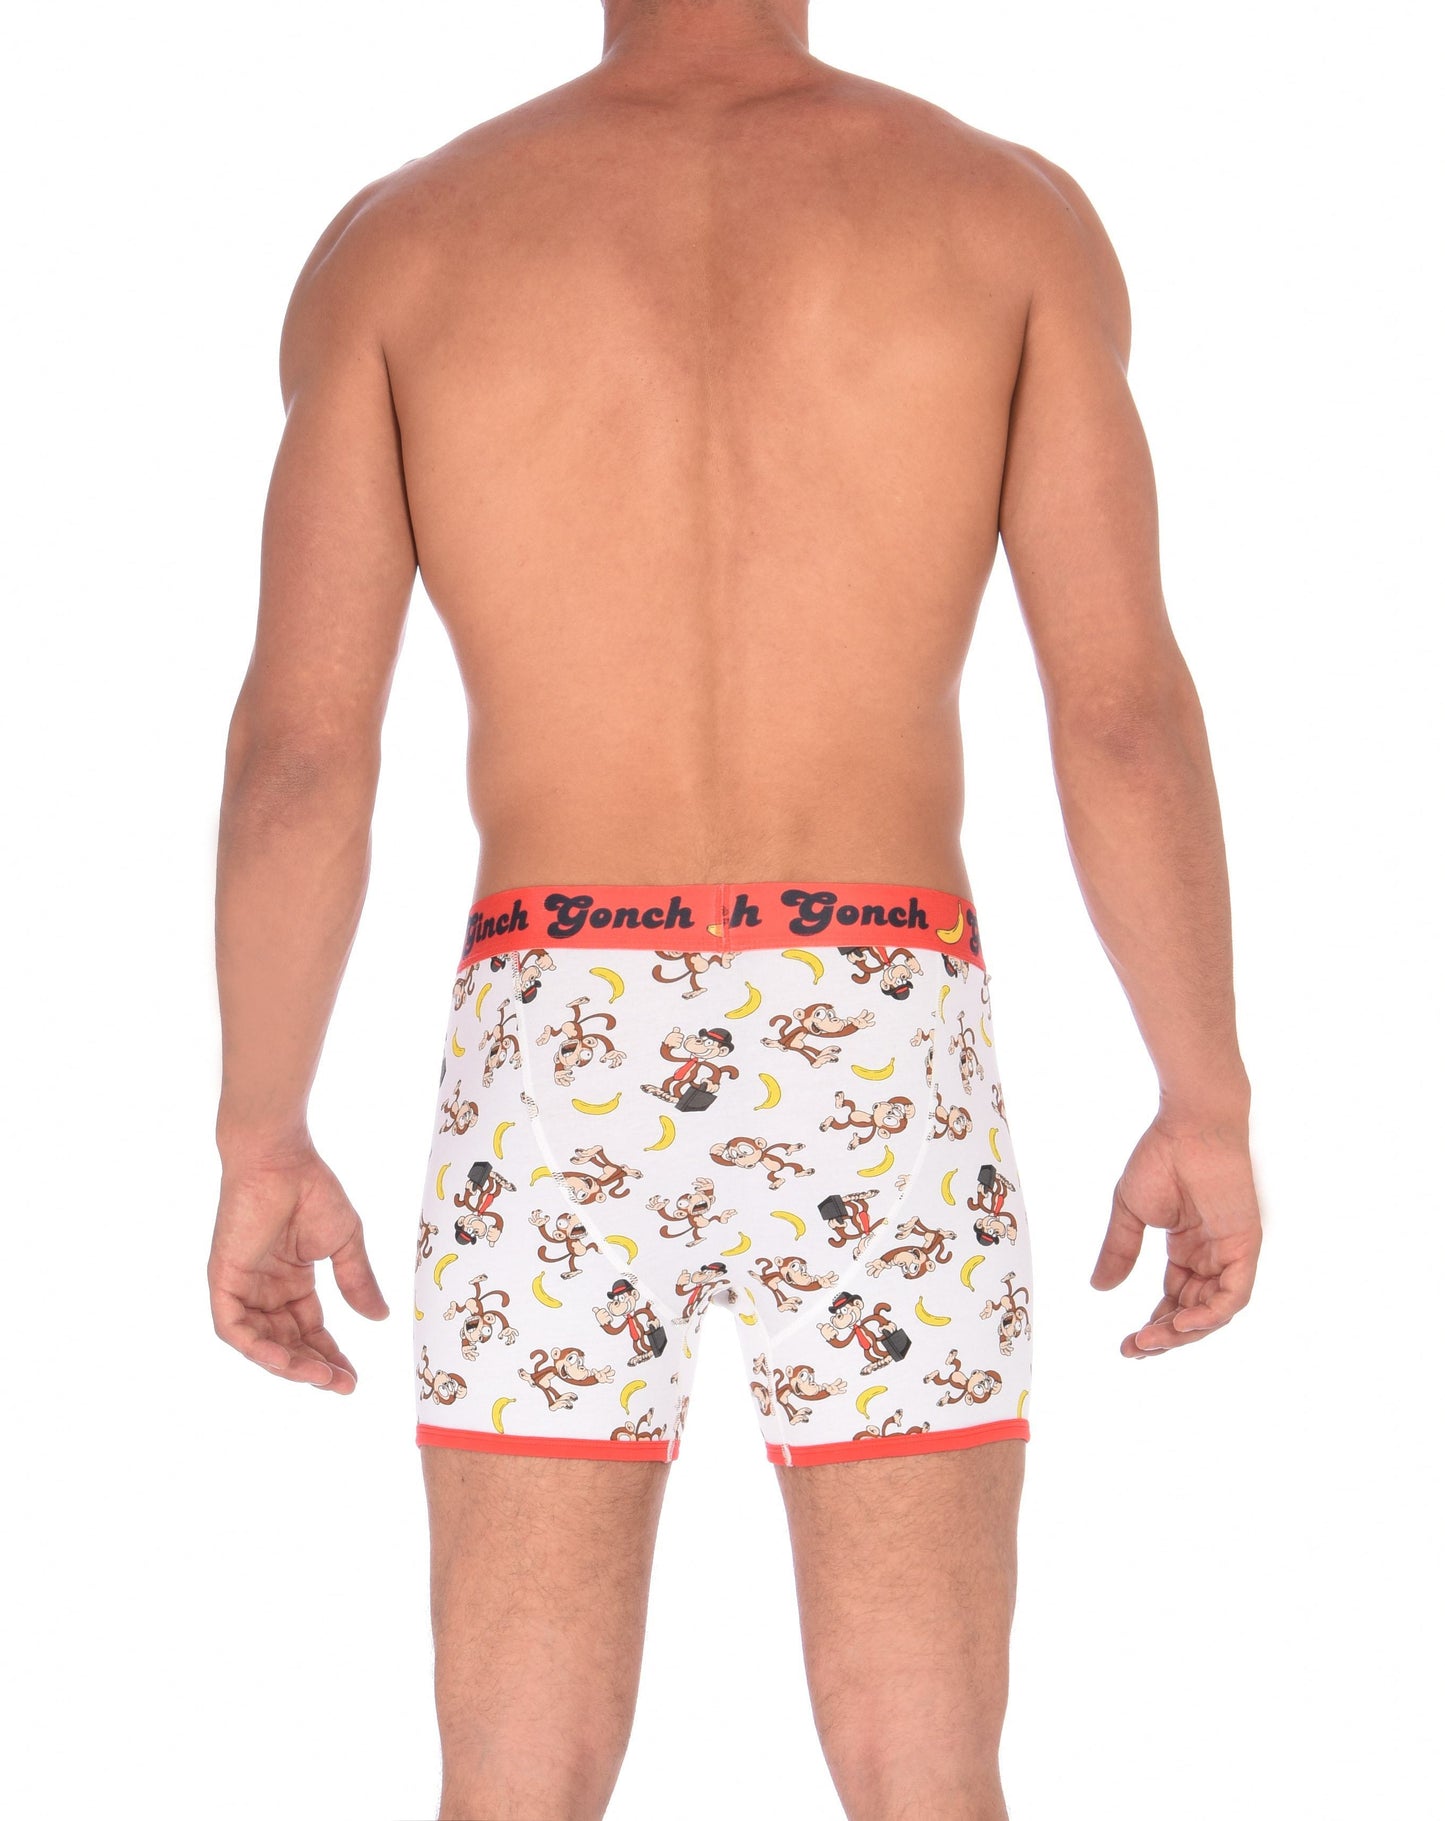 GG Ginch Gonch Gone Bananas Boxer Brief men's underwear trunk y front white fabric with monkeys and bananas red trim and red printed waistband back